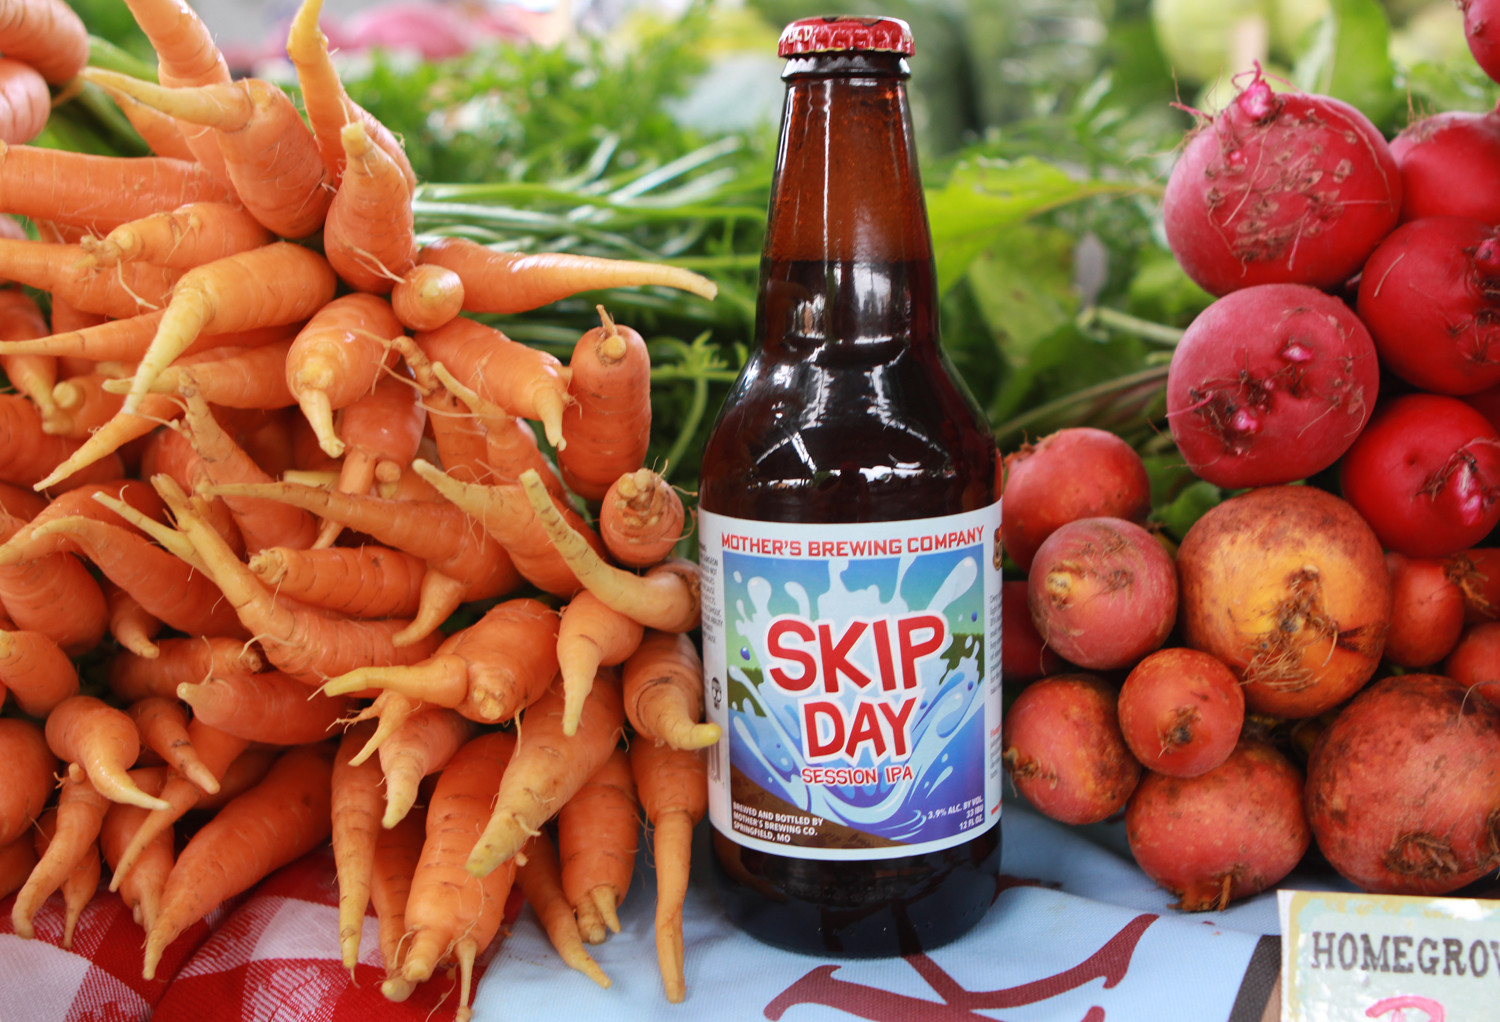 Use a Skip Day to drink a summer session IPA beer.